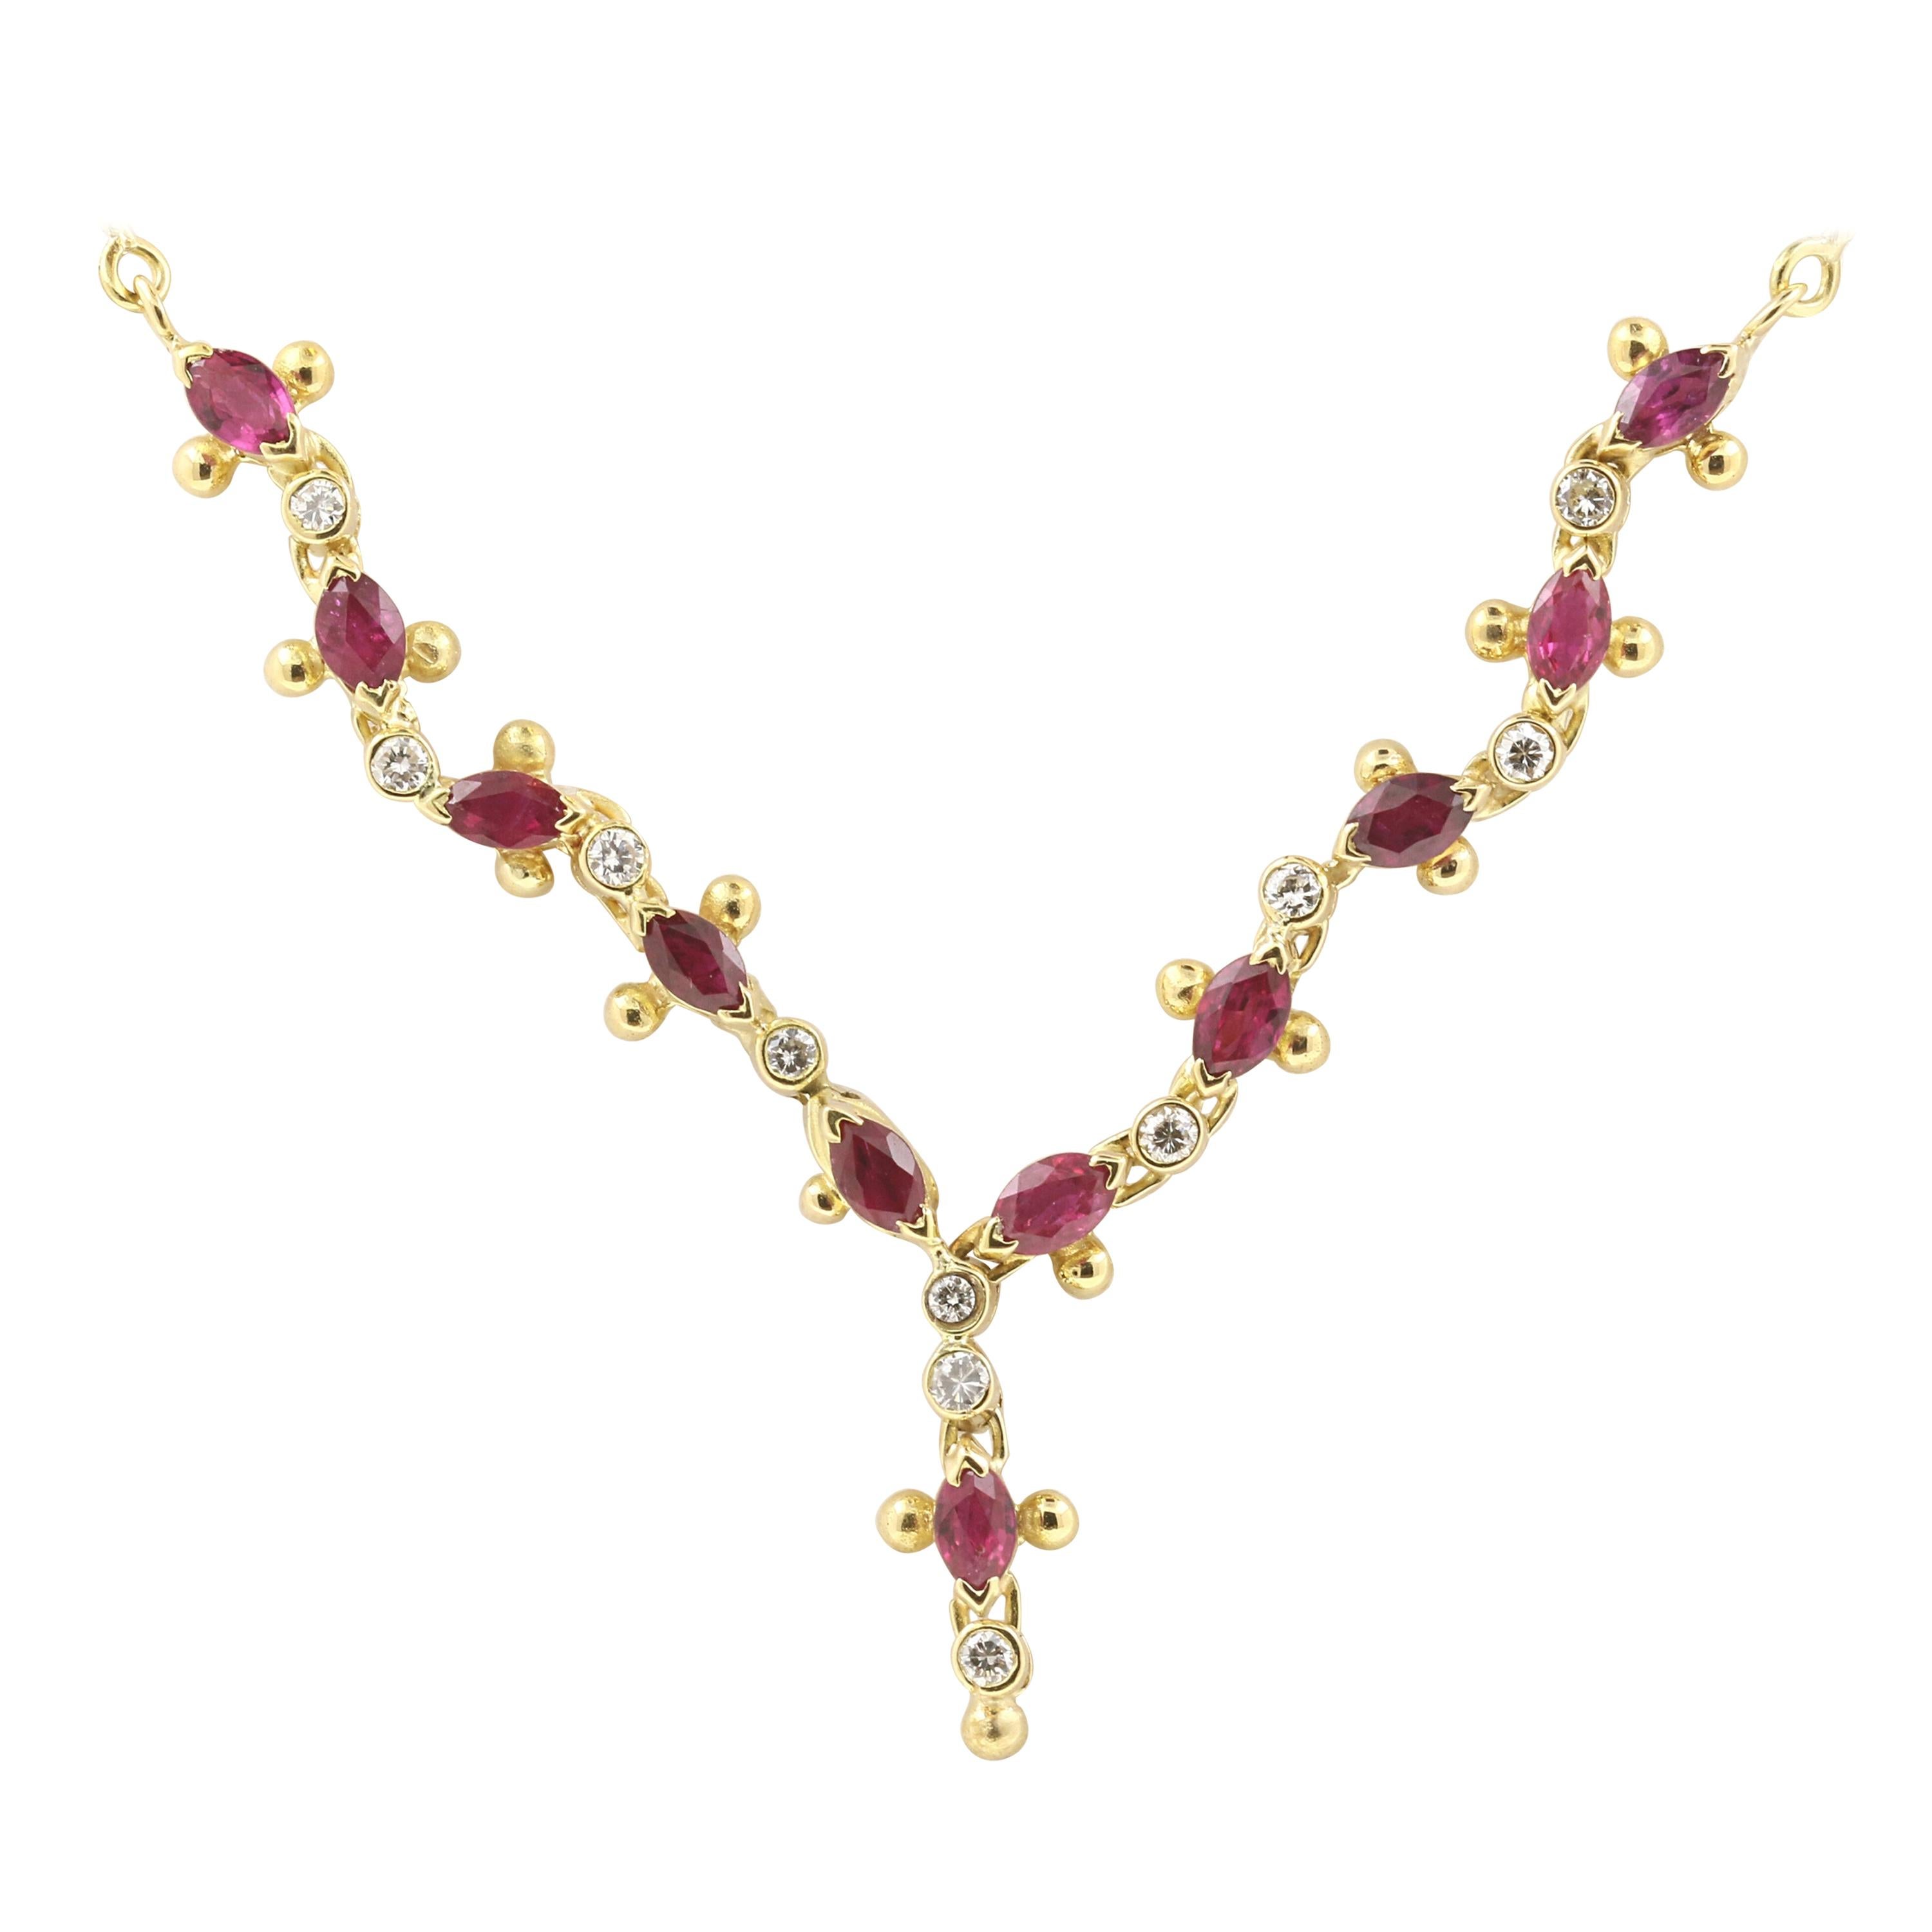 0.66 Ct Oval Rubies and 0.11 Ct Round Diamonds on a 18k Yellow Gold Necklace